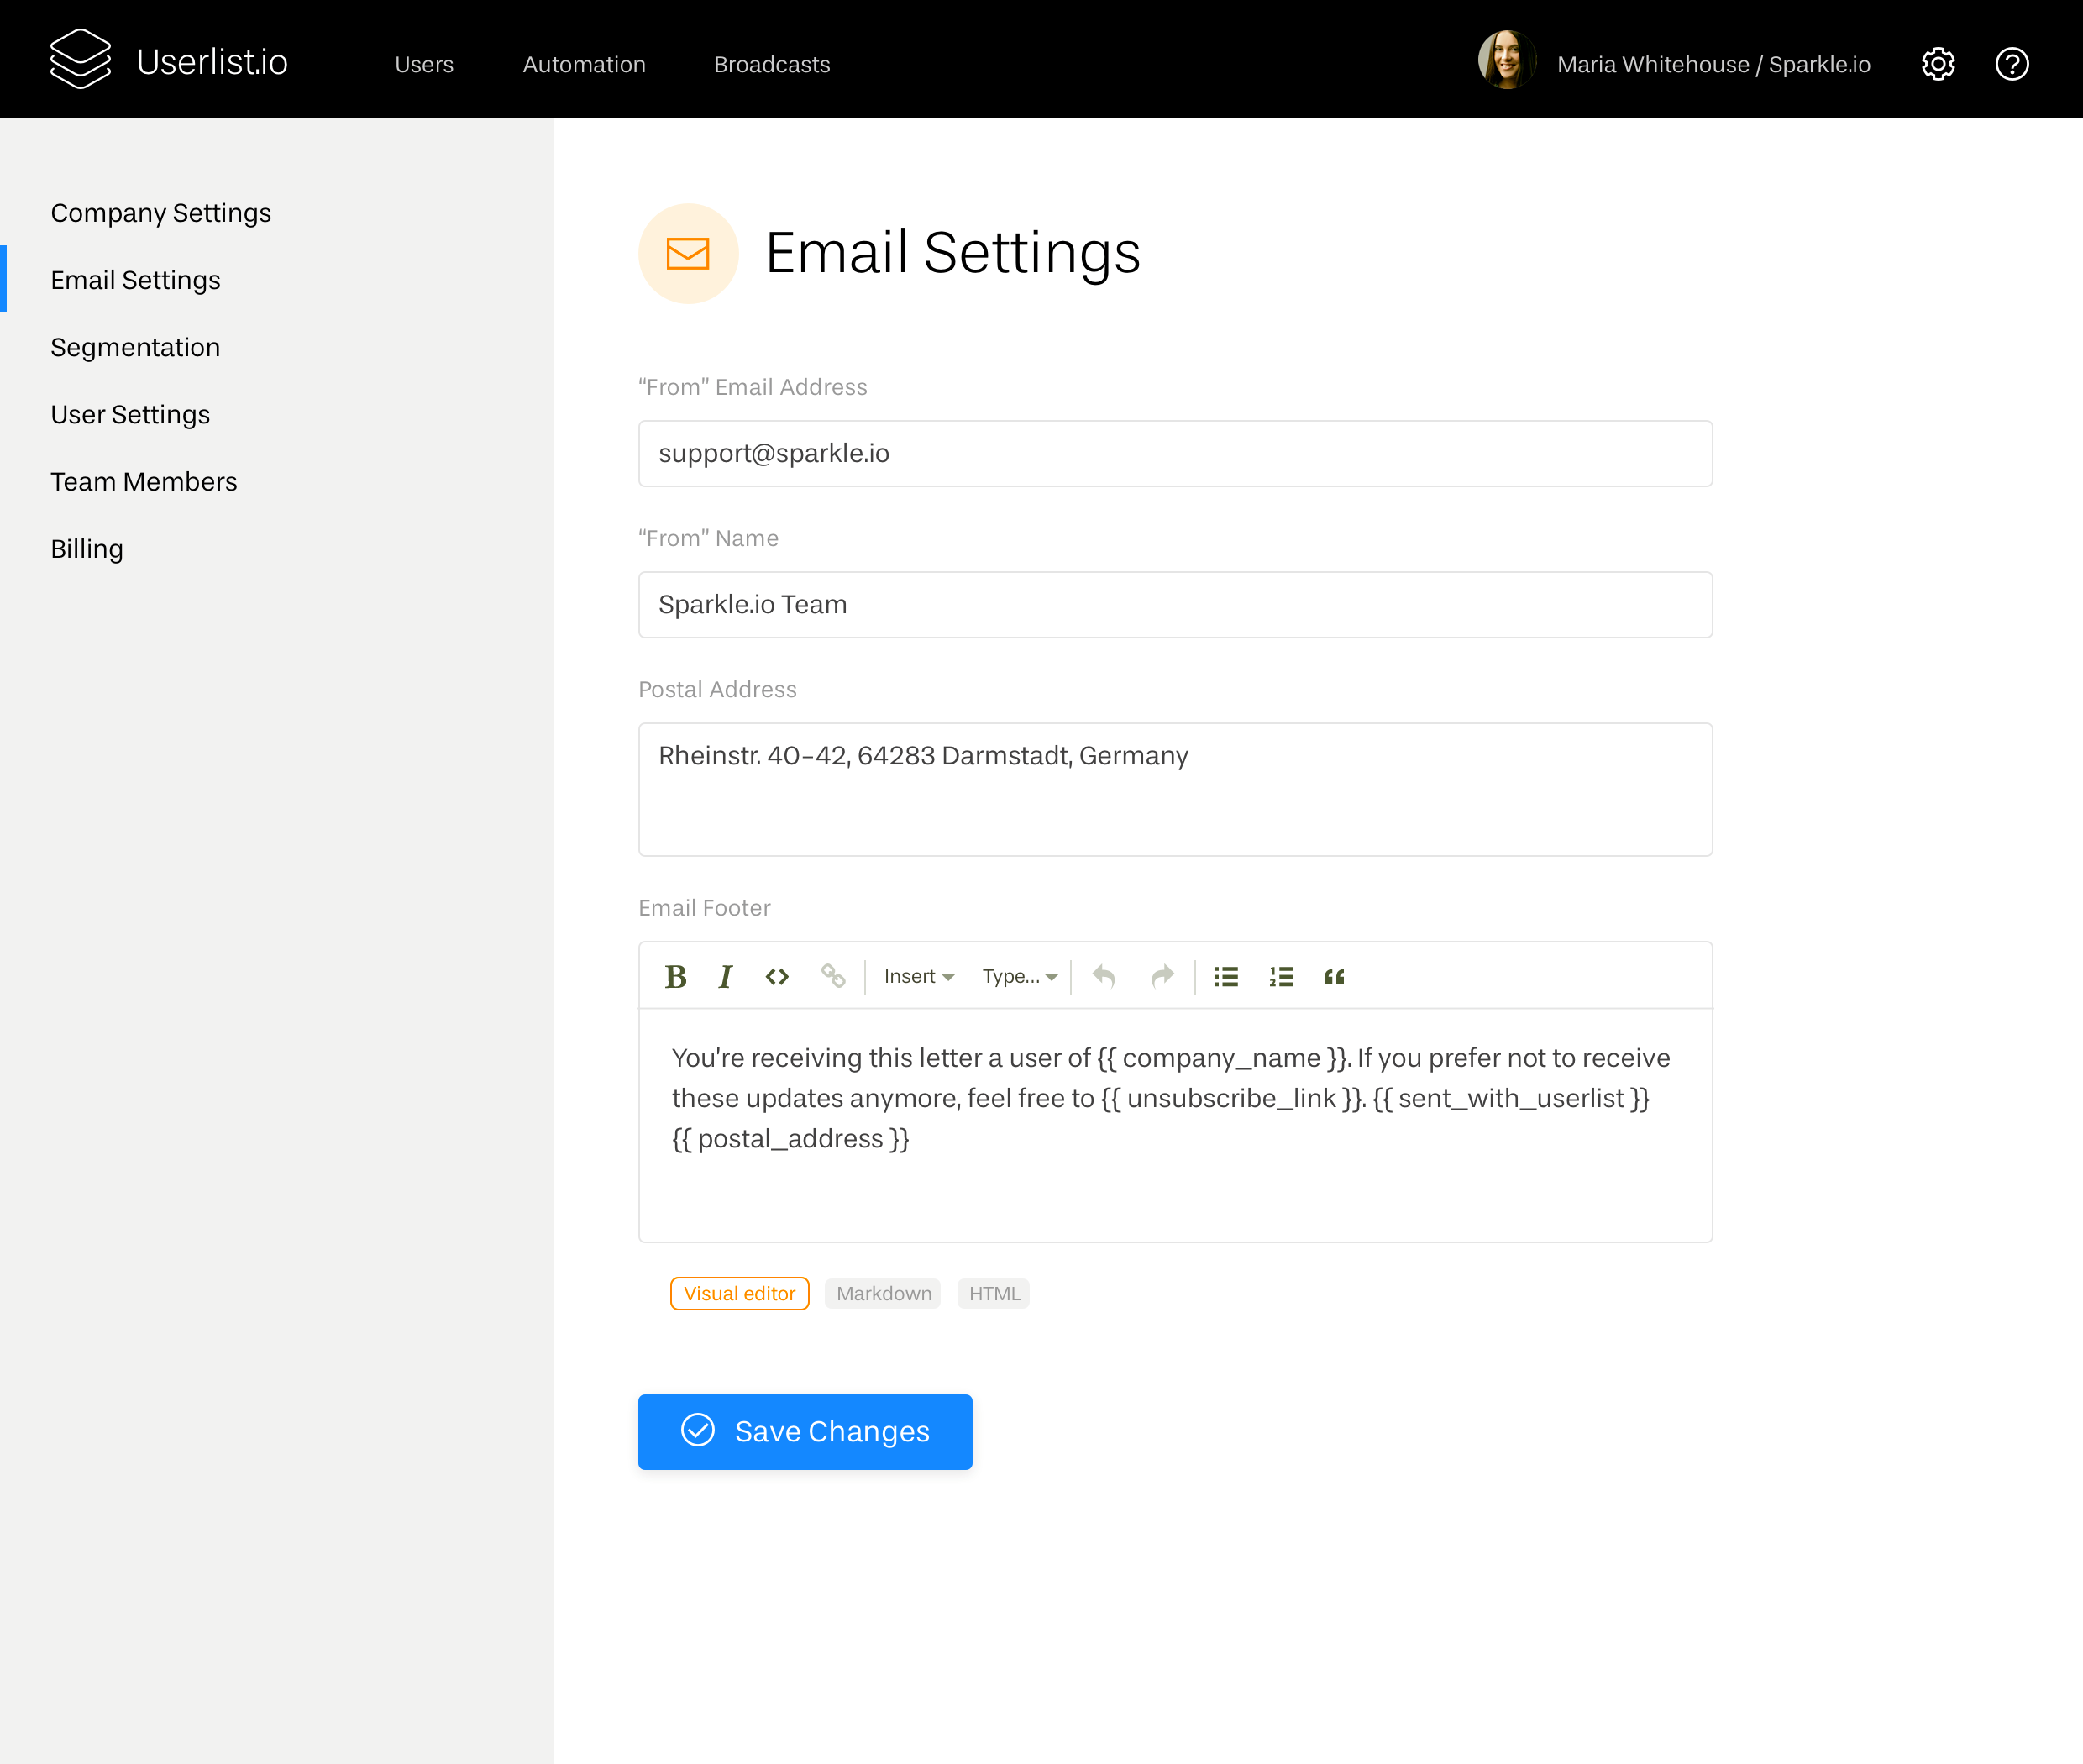 Email settings at Userlist